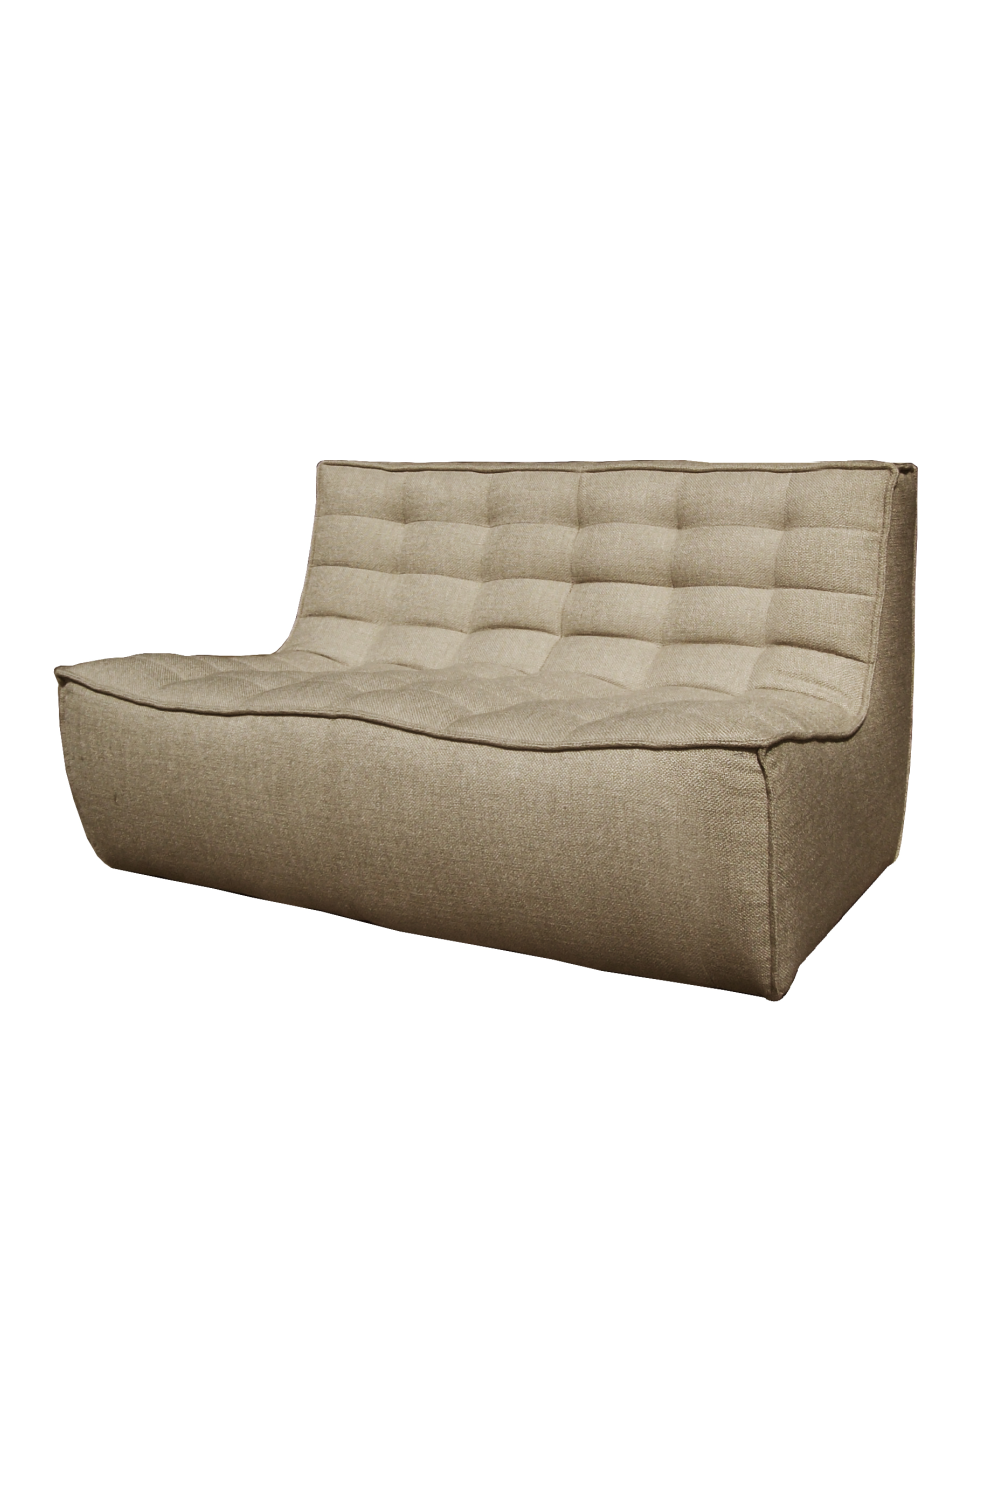 Curved Upholstered Sofa | Ethnicraft N701 | Oroa.com